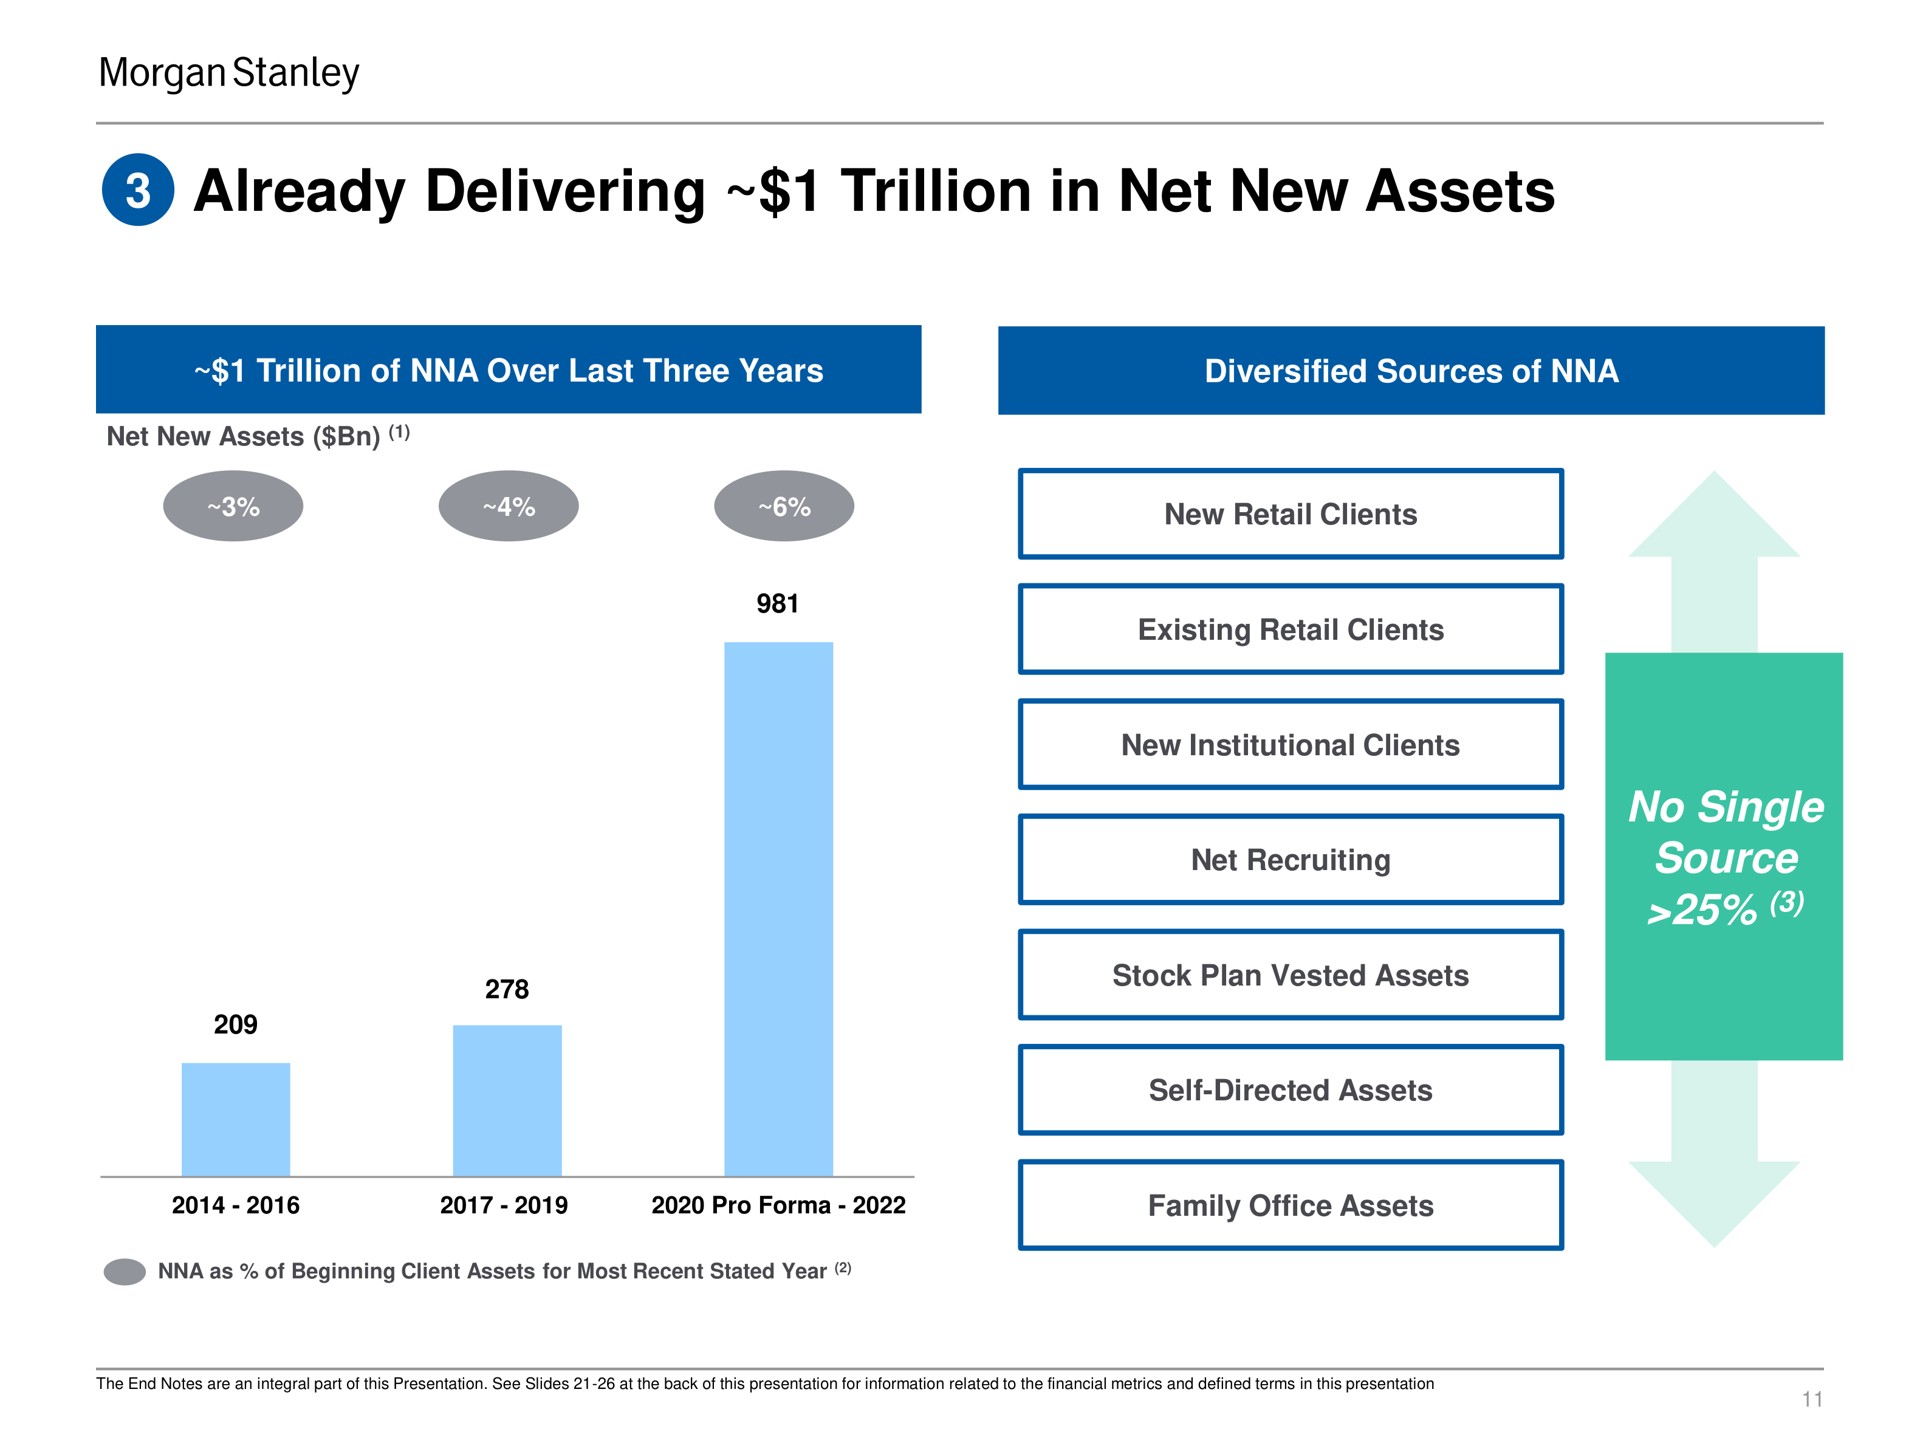 already delivering trillion in net new assets no single source | Morgan Stanley